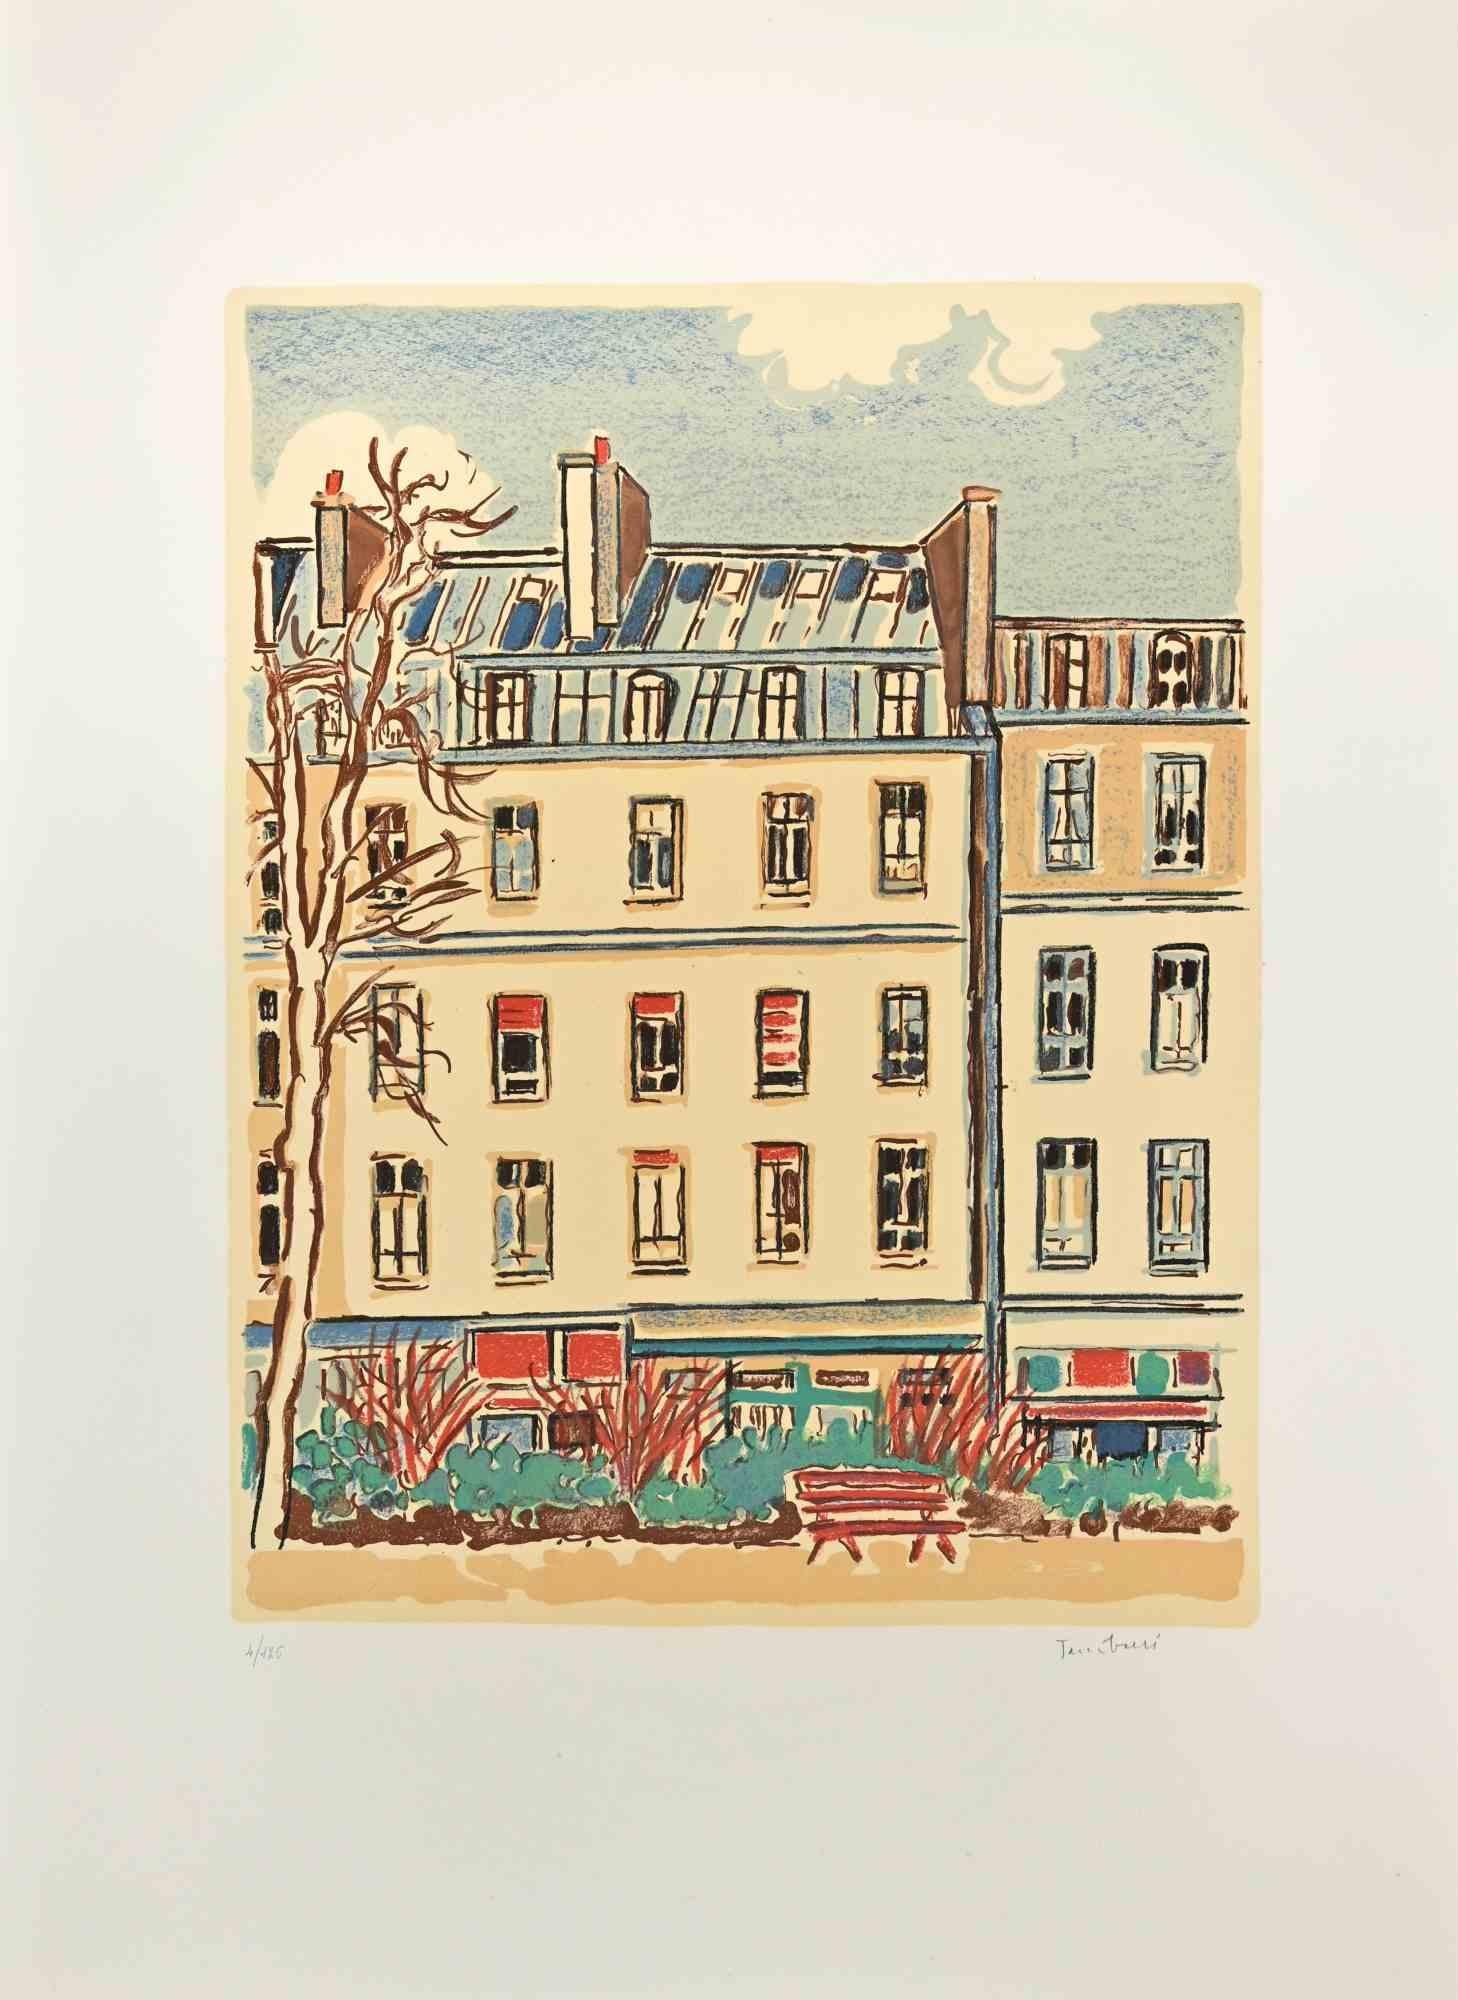 View of Paris is a Modern artwork realized by Orfeo Tamburi  (Jesi, 1910 – Paris,1994) in the 1980s. 

Colored Lithograph on paper. 

Hand-signed.

Numbered on the lower, Edition of 125 prints.

Good conditions. 

 